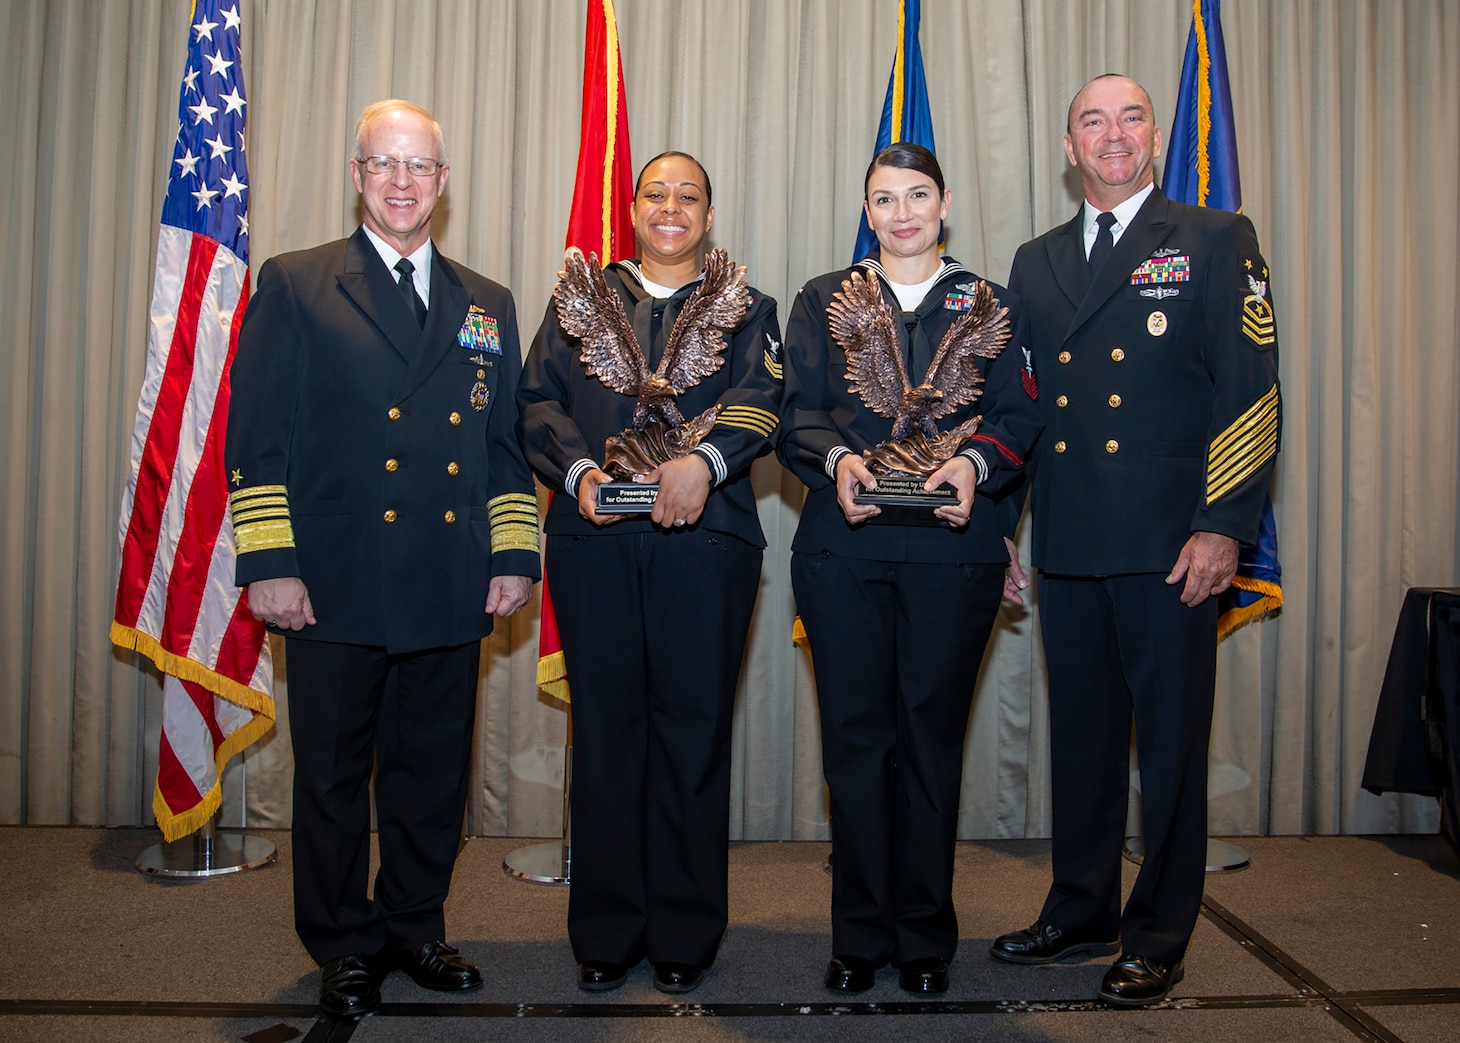 NORFOLK, Va. (June 2, 2023) Adm. Daryl Caudle, commander, U.S. Fleet Forces Command (USFFC), left, and Fleet Master Chief John Perryman, right, pose with the 2022 USFFC Sea Sailor of the Year (SOY) Operations Specialist 1st Class Kandace Tomkin, of Commander, Task Force 80, from Weisbaden, Germany, center left, and the USFFC Shore SOY Hospital Corpsman 1st Class Heather Rufohuse, of United States Marine Corps Forces Command, from Cleveland, Ohio. The SOY program was established in 1972 by Chief of Naval Operations Adm. Elmo Zumwalt and Master Chief Petty Officer of the Navy John Whittet, to recognize the fleet’s top performing Sailors. (U.S. Navy photo by Mass Communication Specialist 3rd Class Grace Lyles)